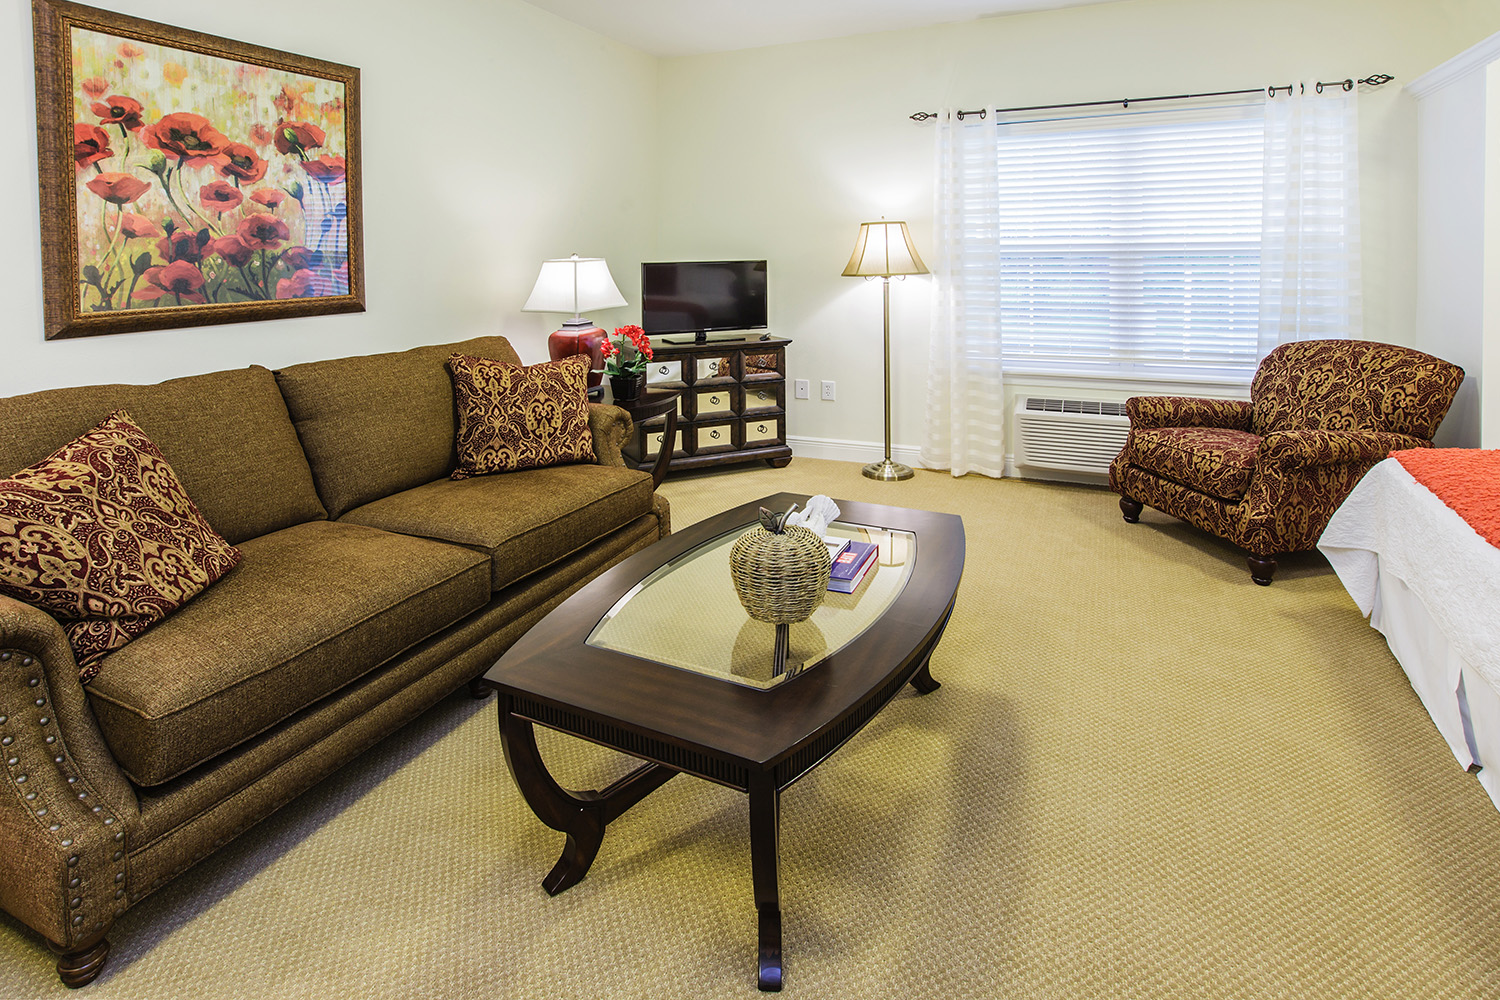 Country Place Senior Living of Livingston image